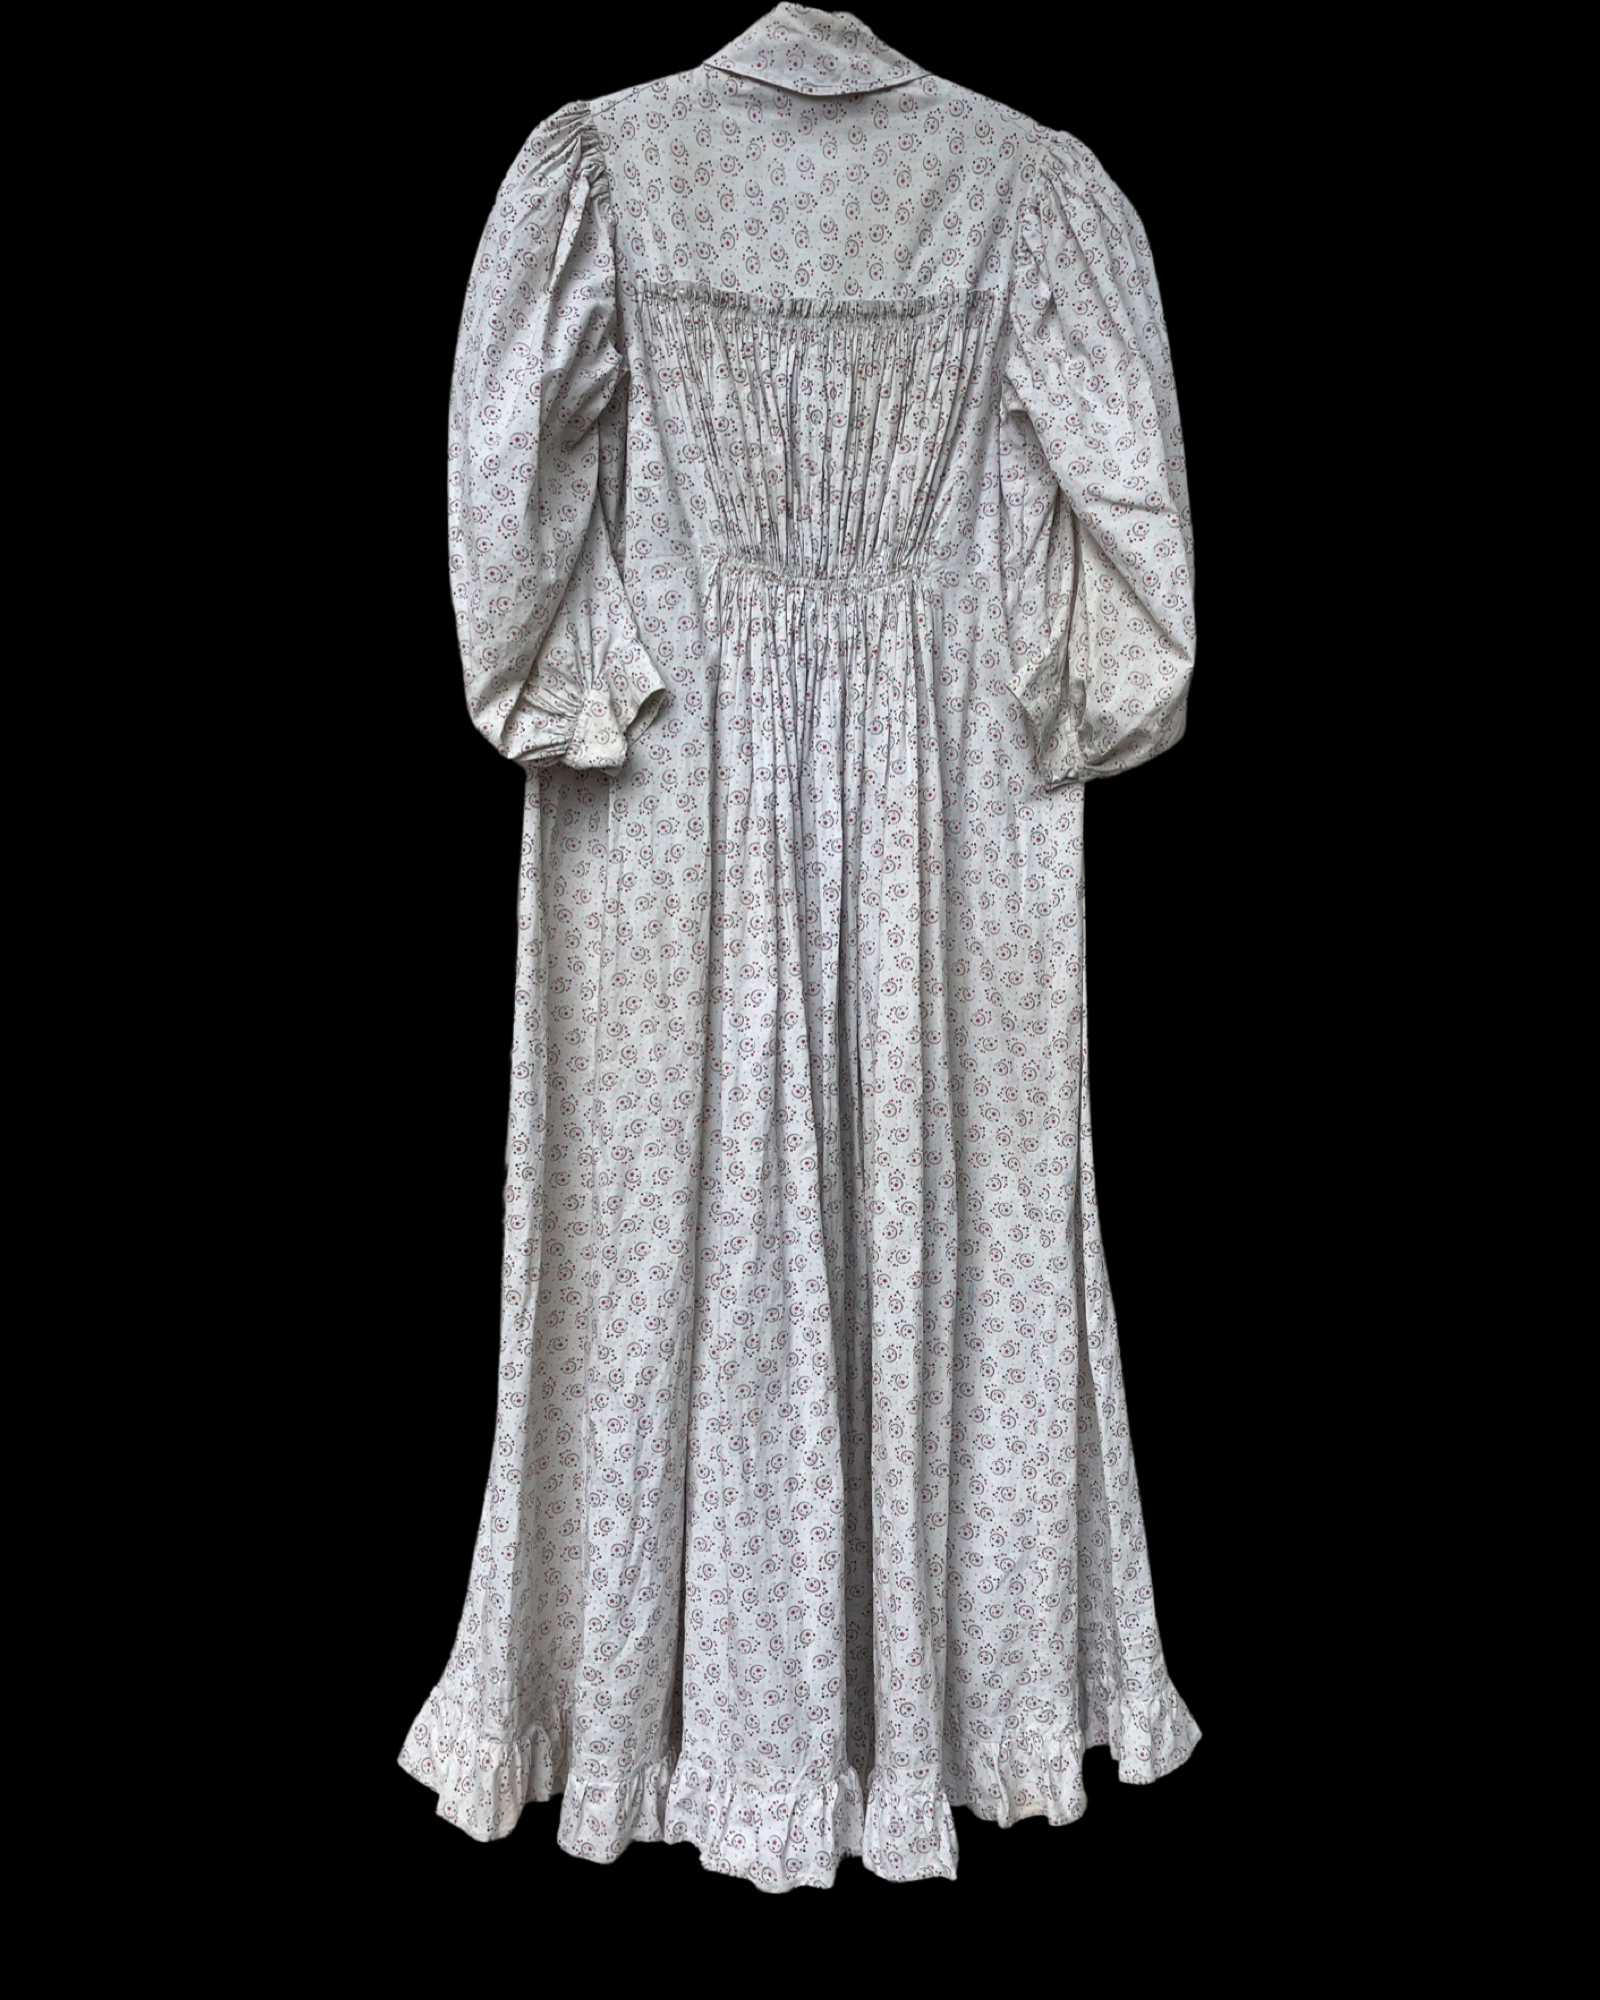 1890s Celestial Printed Calico Mutton Sleeve Wrapper Dress